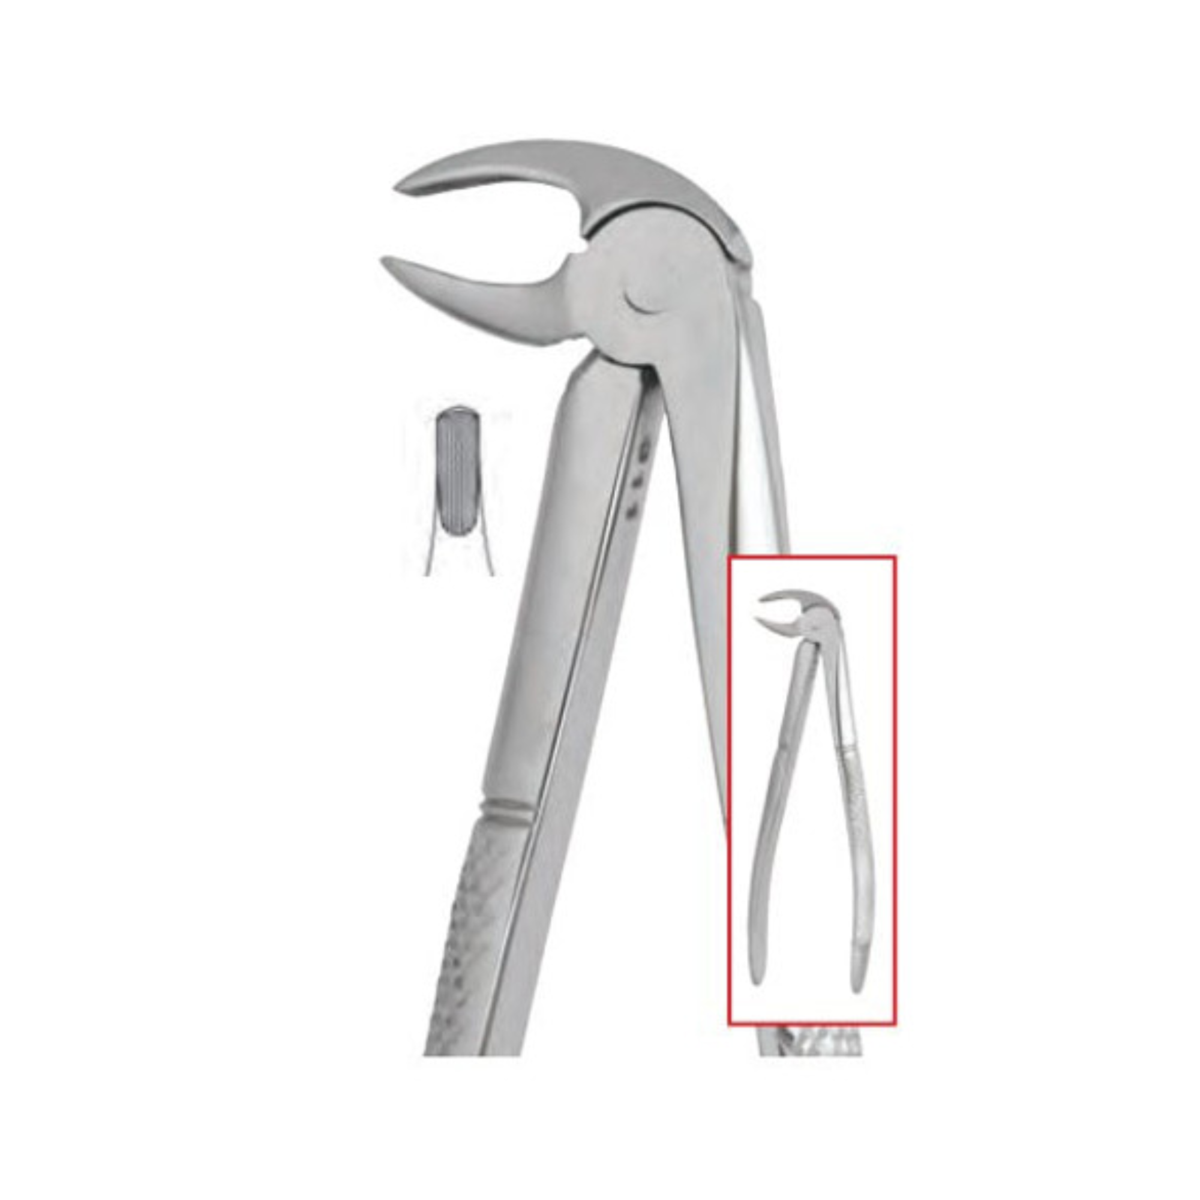 Nordent FE13-SER Extraction Forceps Lower Bicuspid English Pattern #13 Serrated